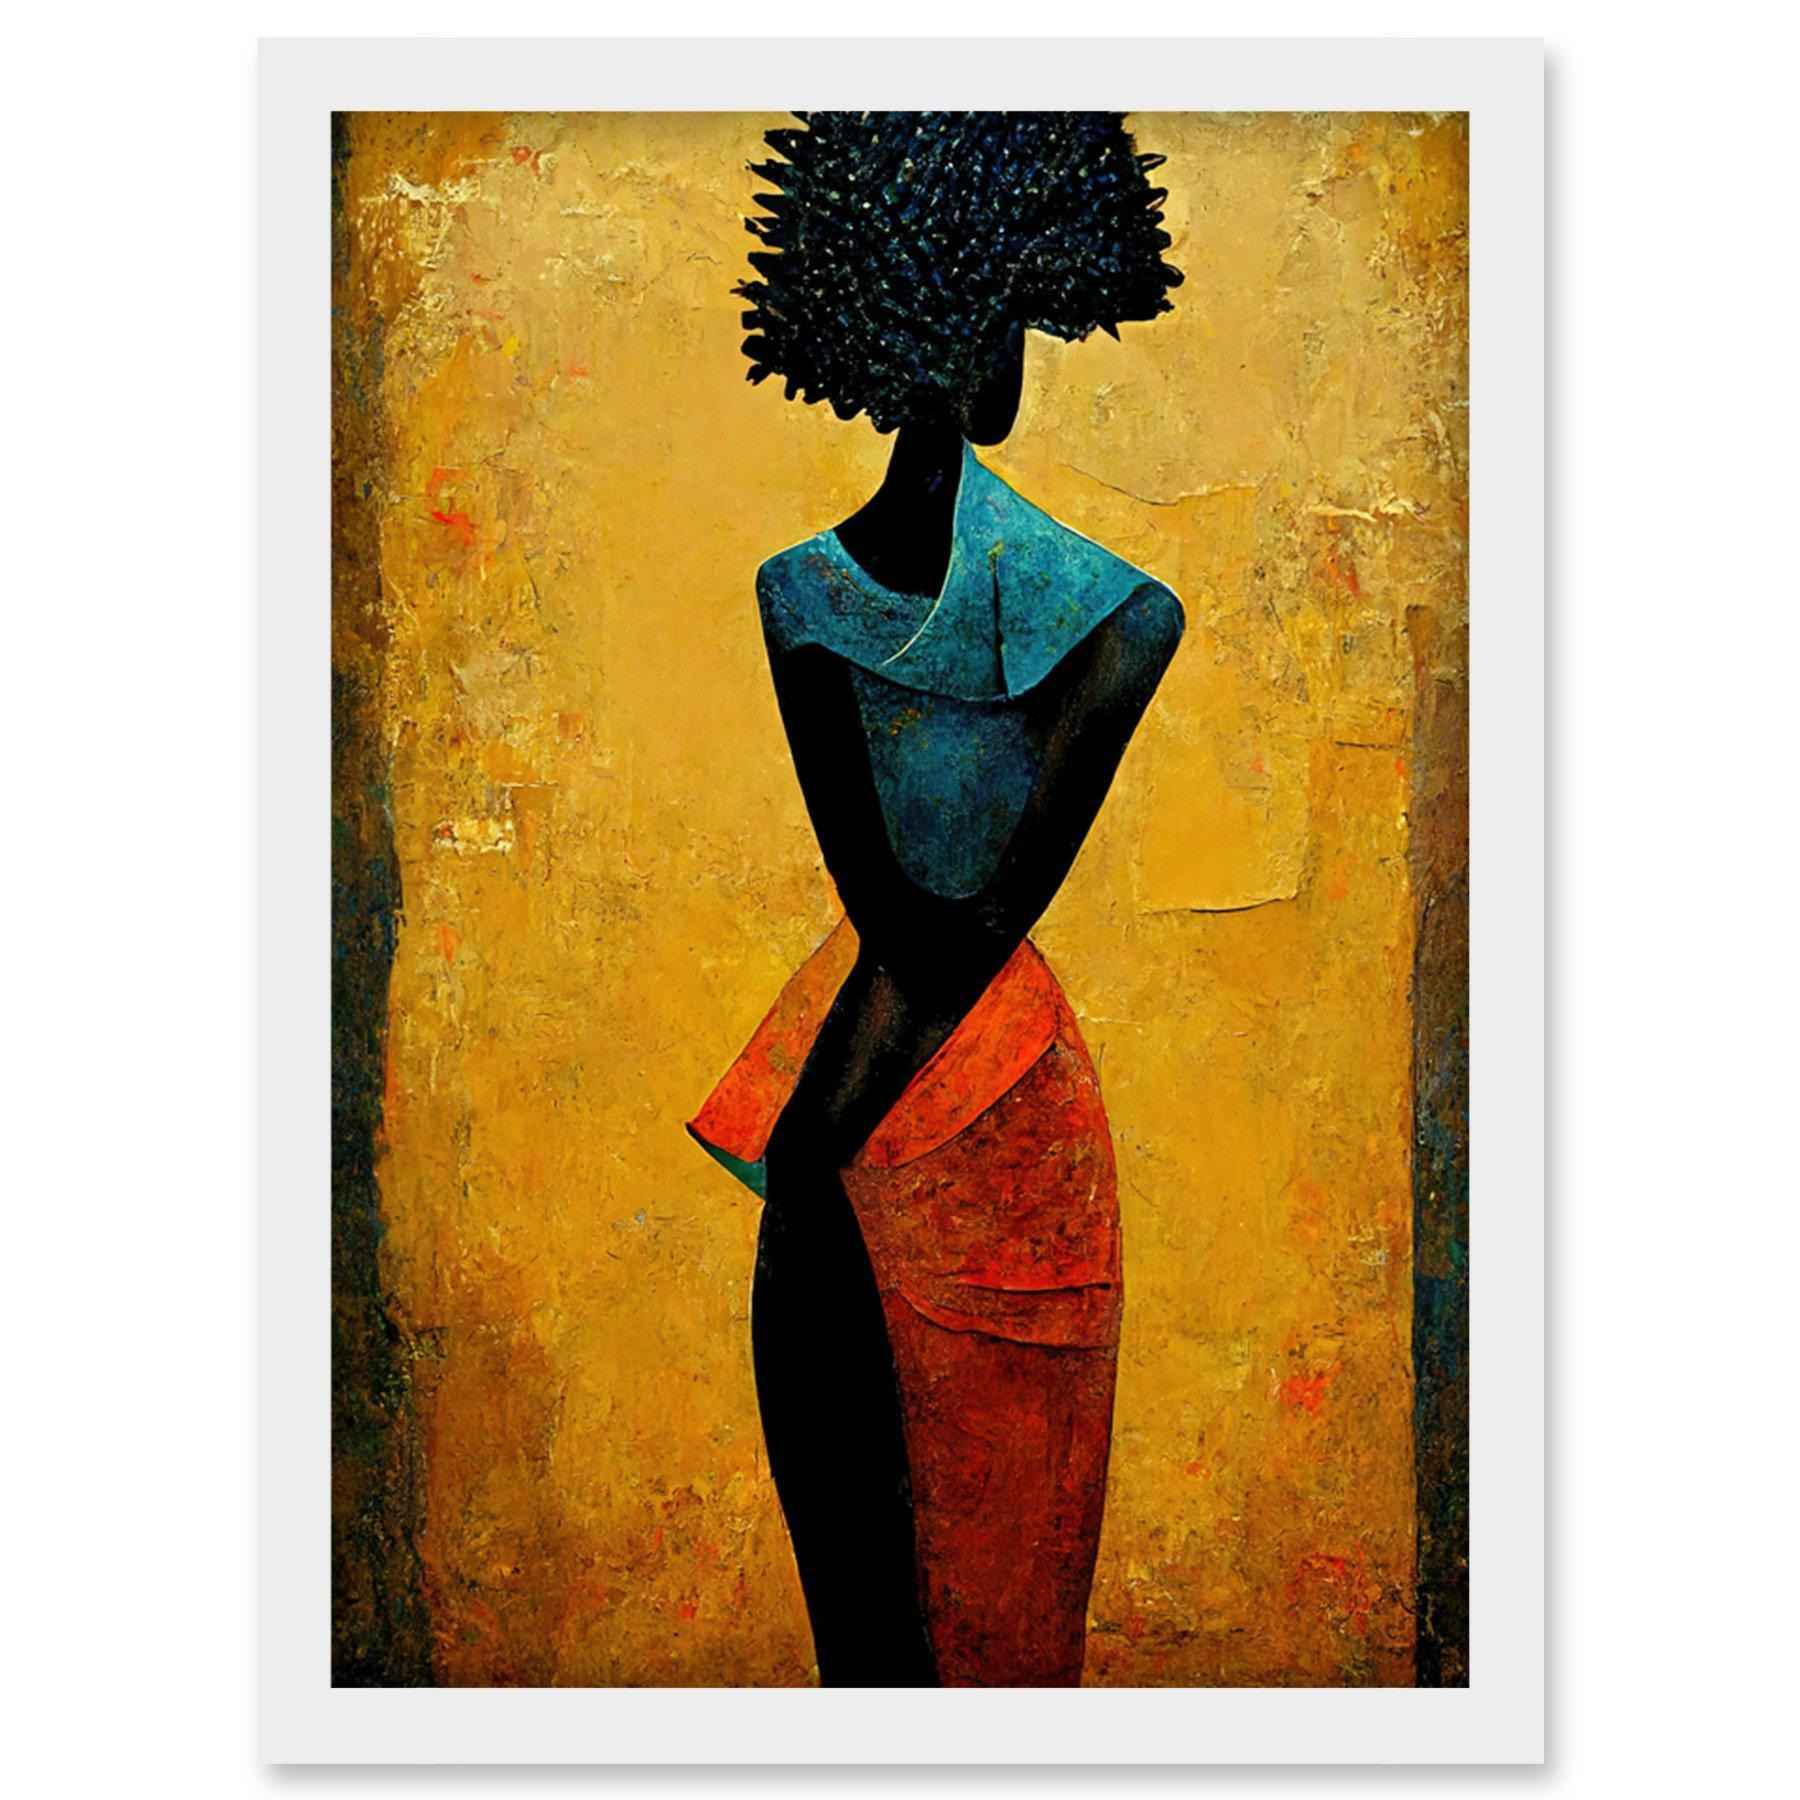 Abstract Oil African Woman Artwork Framed Wall Art Print A4 - image 1